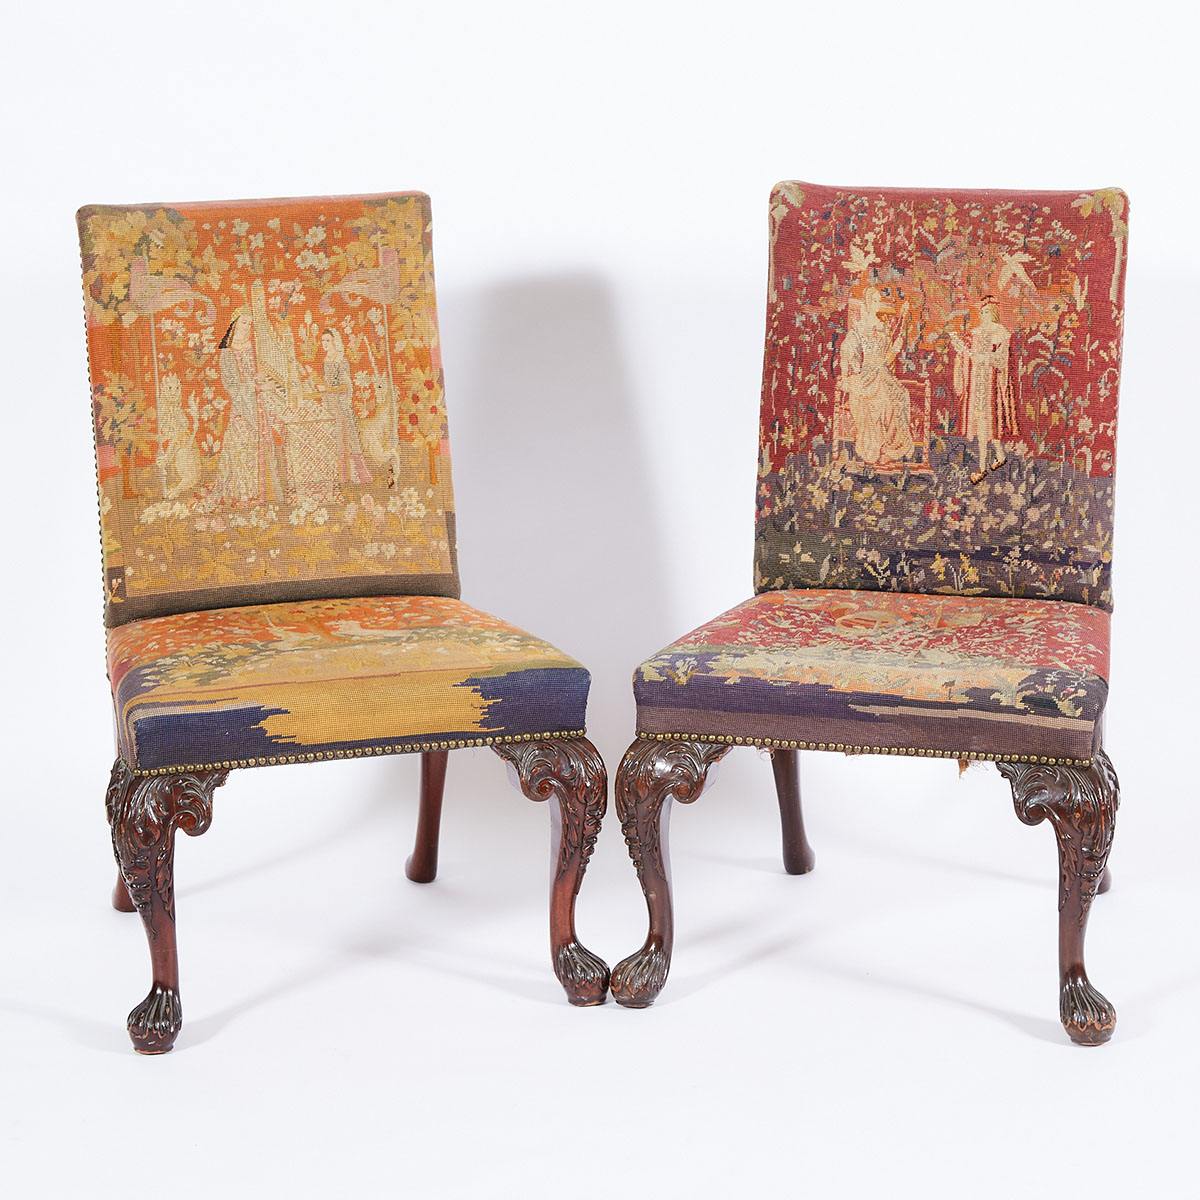 Pair of George II Style Mahogany Side Chairs, early 20th century